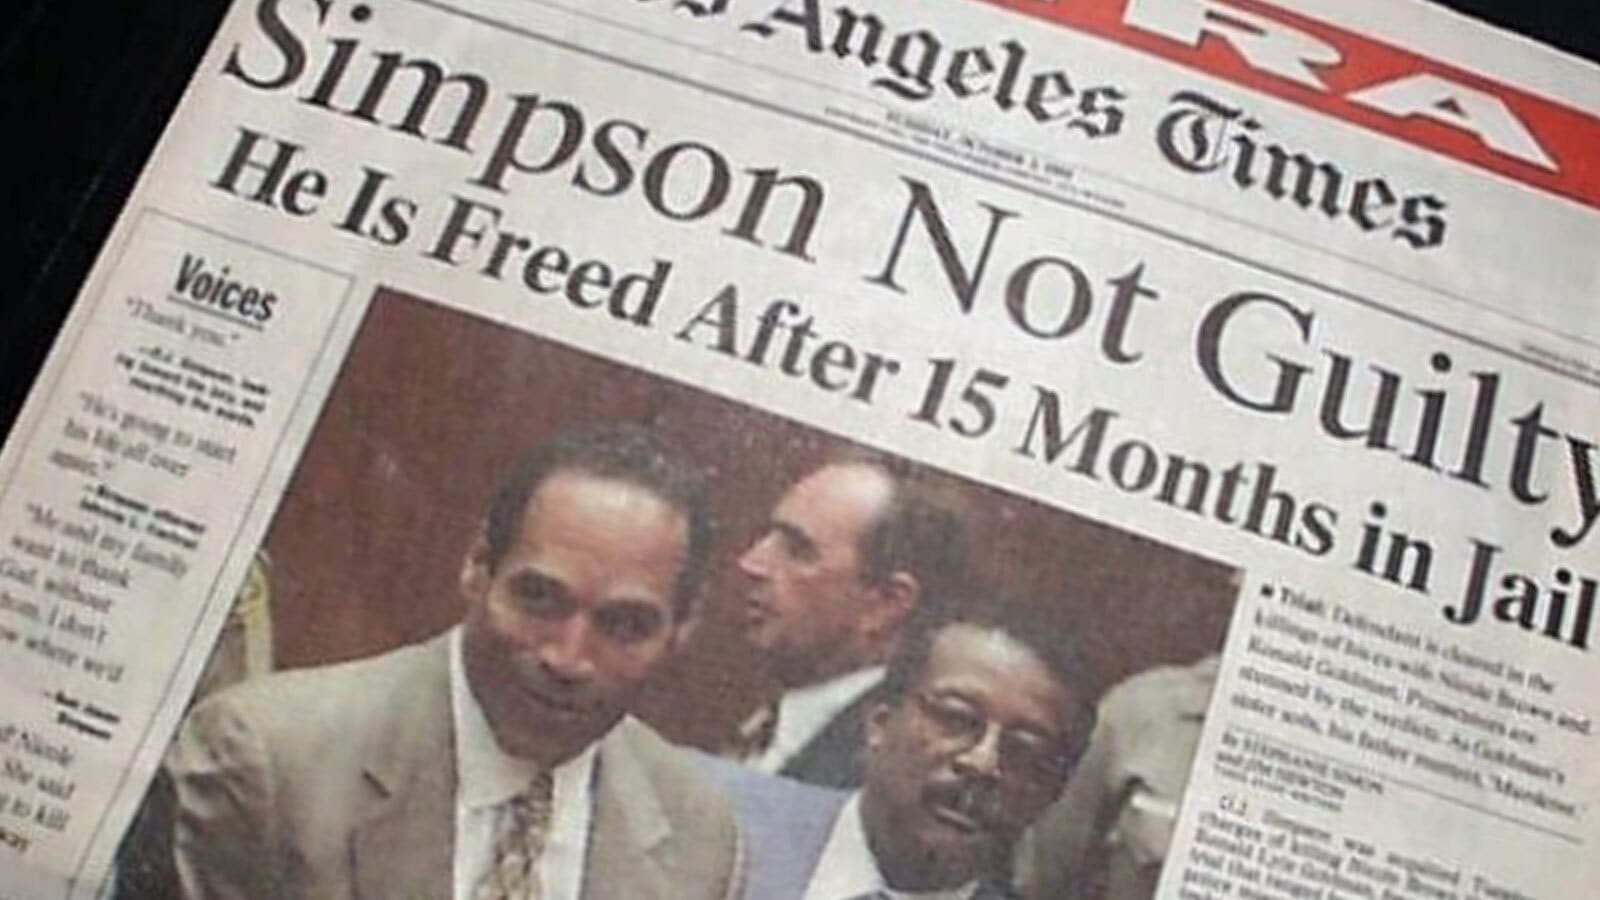 front page of Los Angeles Times Extra, October 3, 1995, headline reads Simpson Not Guilty: He is freed after 15 months in jail. In the photo, he is in a tan suit in the courtroom, slightly smiling.